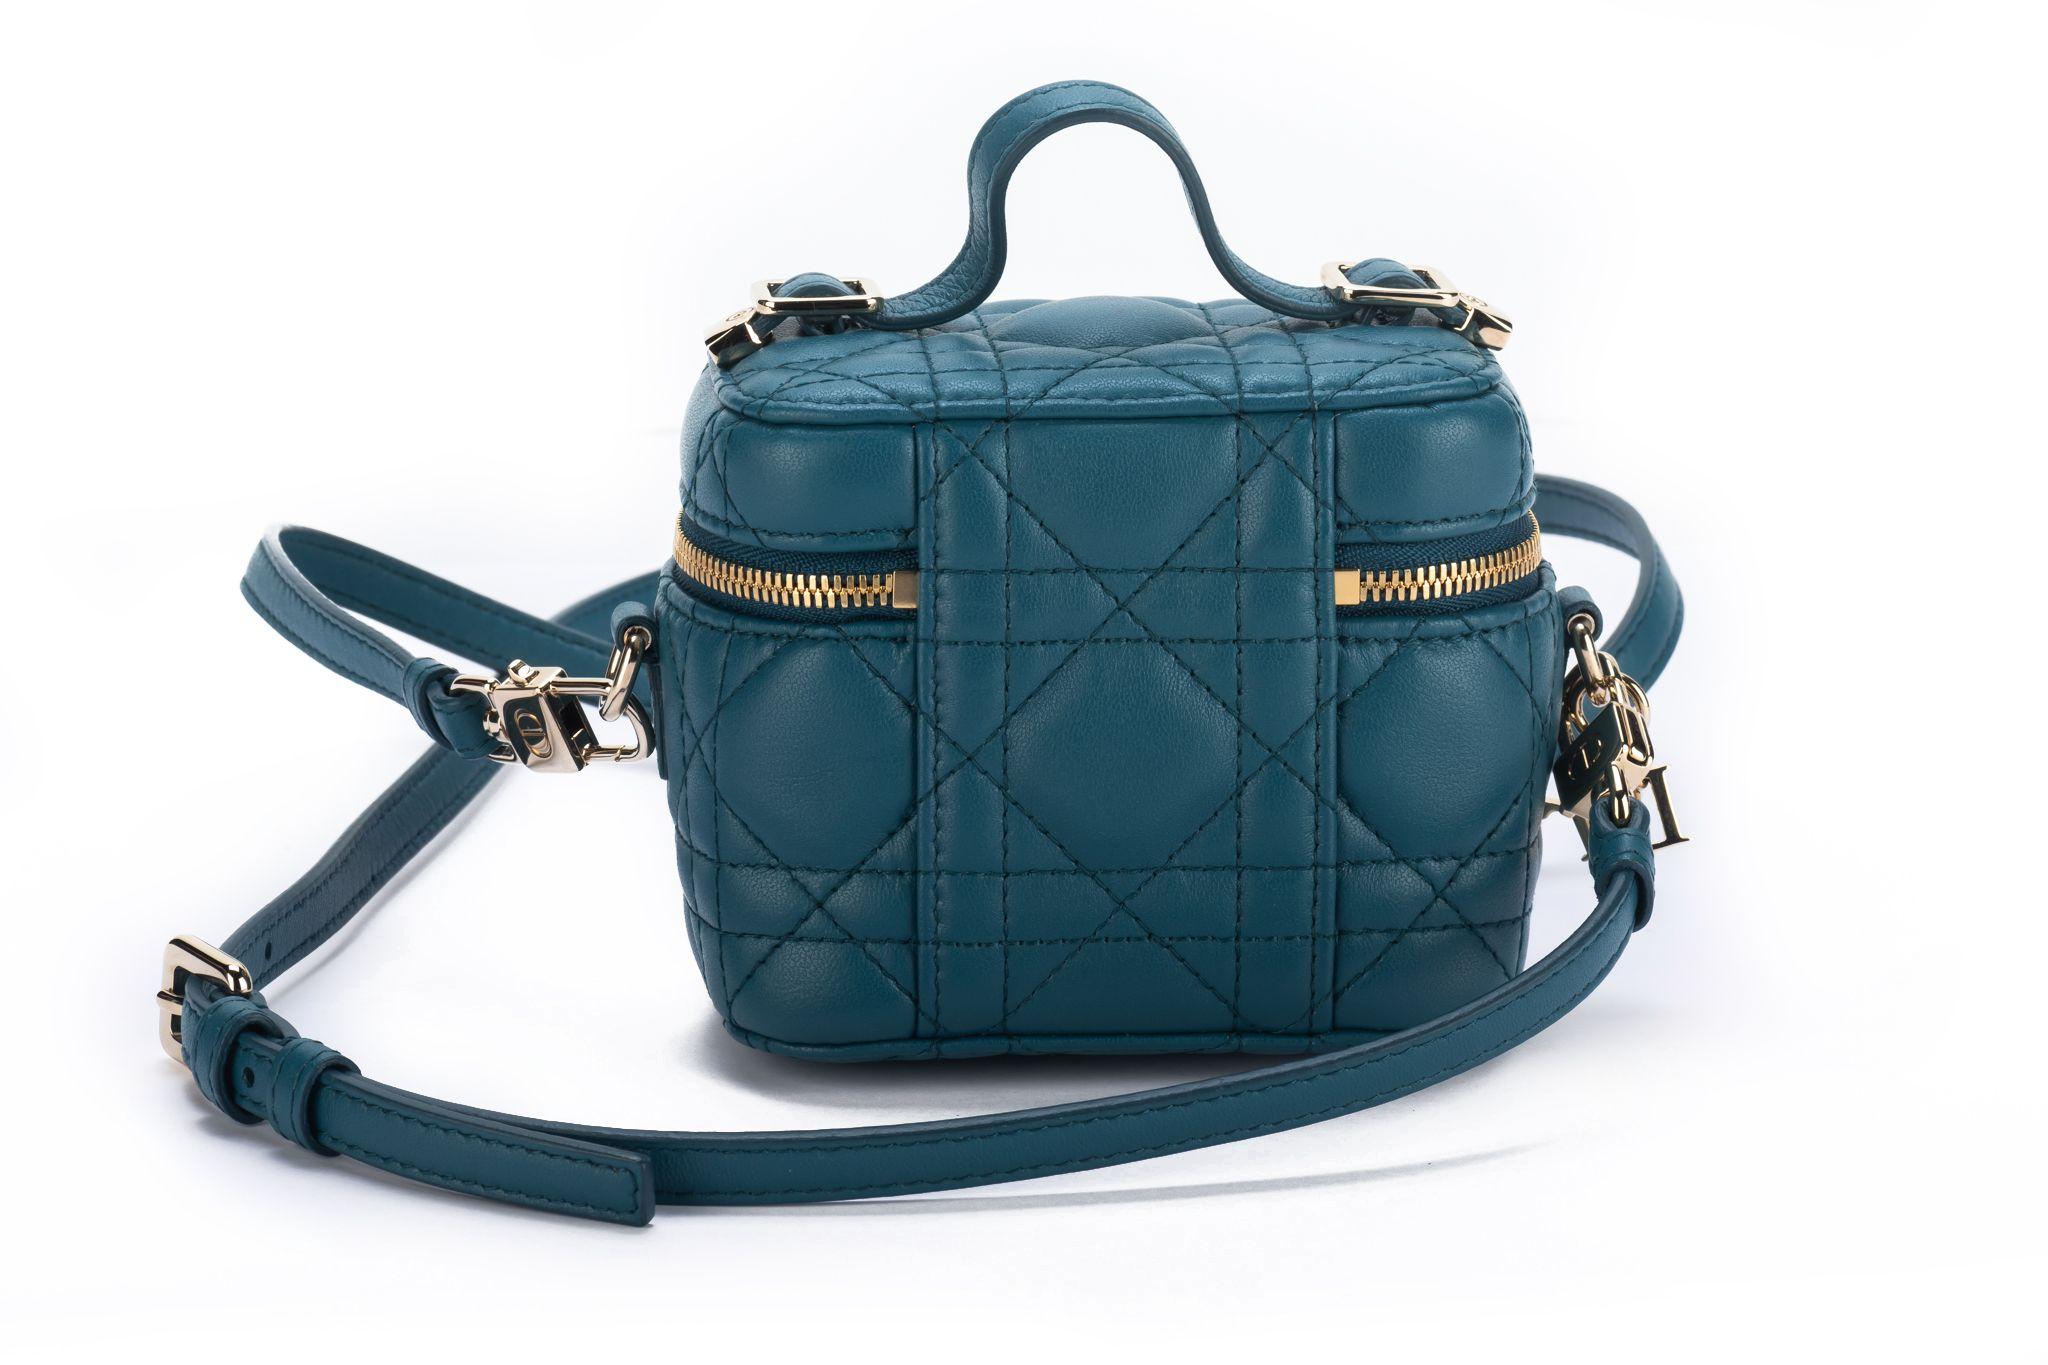 Dior Mini Cannage Turquoise Travel Case In Excellent Condition For Sale In West Hollywood, CA